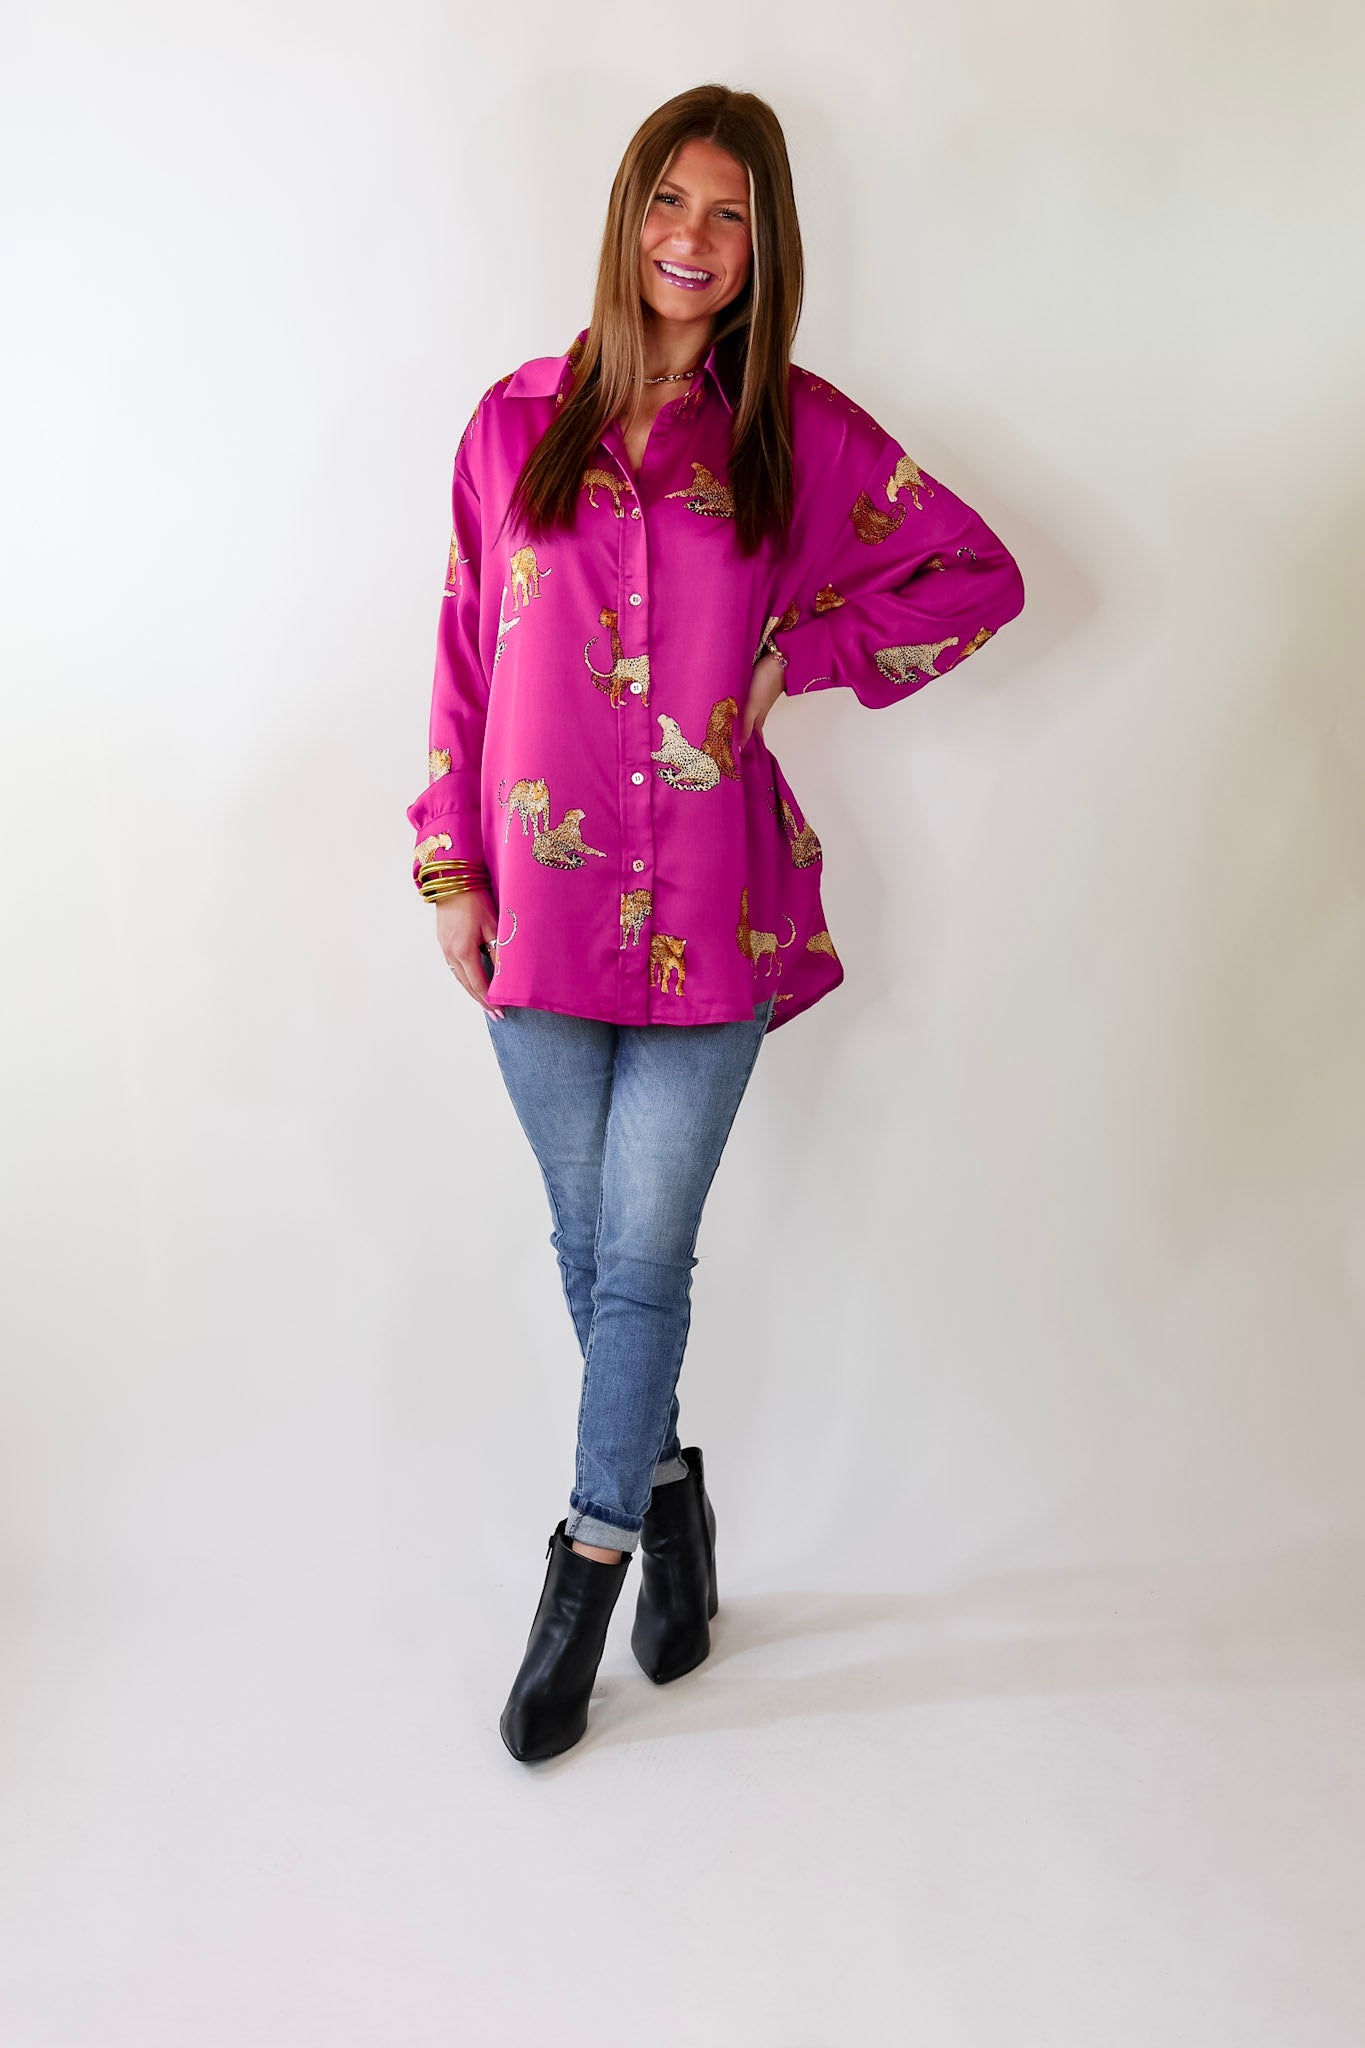 Tell Me Something Good Cheetah Print Long Sleeve Button Up Top in Magenta Pink - Giddy Up Glamour Boutique